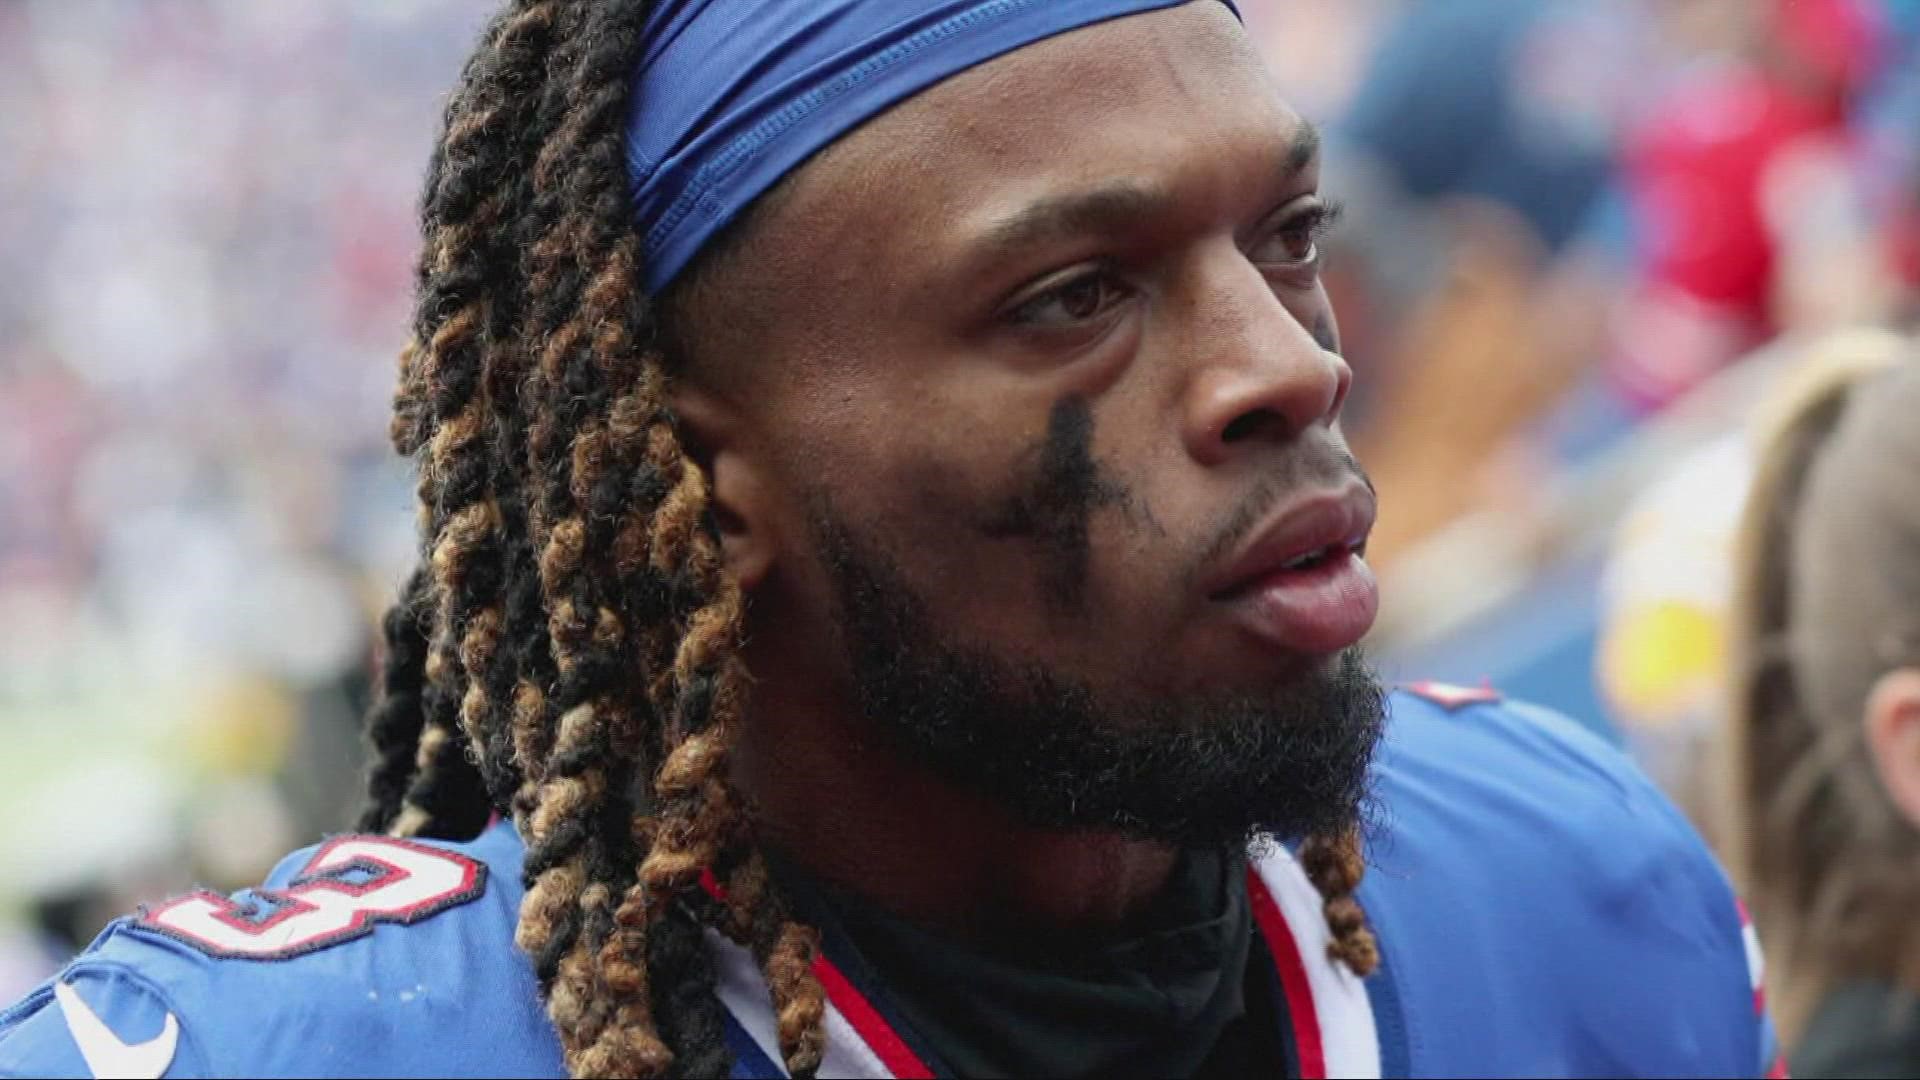 The medical staff provided care for Buffalo Bills safety Damar Hamlin after he suffered a cardiac arrest on the field during a game against the Cincinnati Bengals.